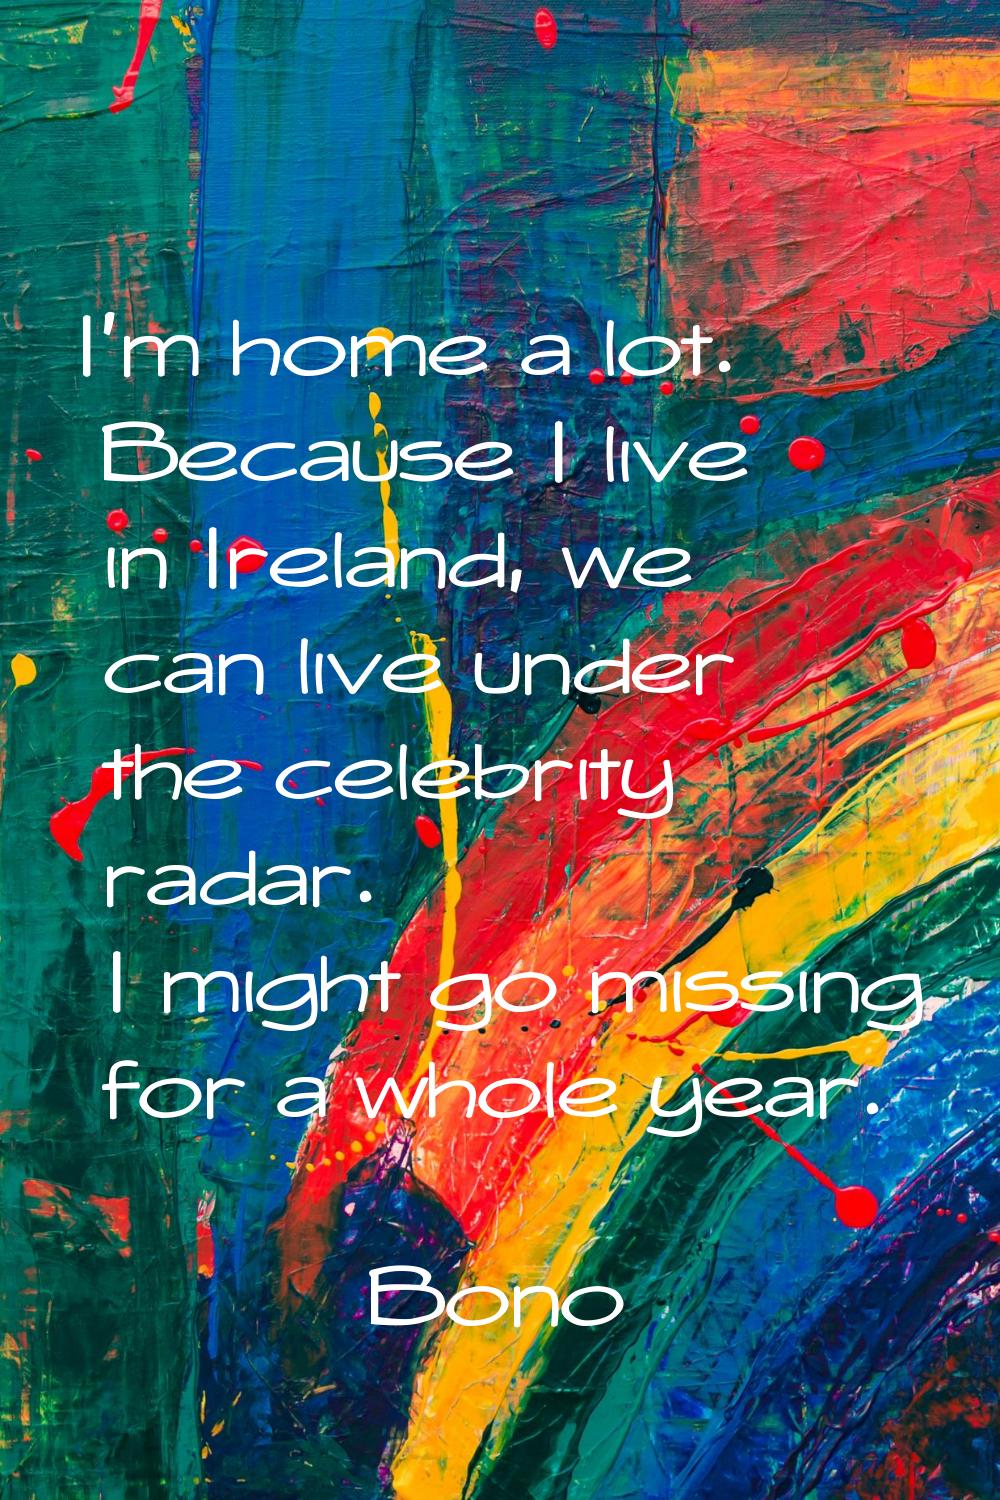 I'm home a lot. Because I live in Ireland, we can live under the celebrity radar. I might go missin